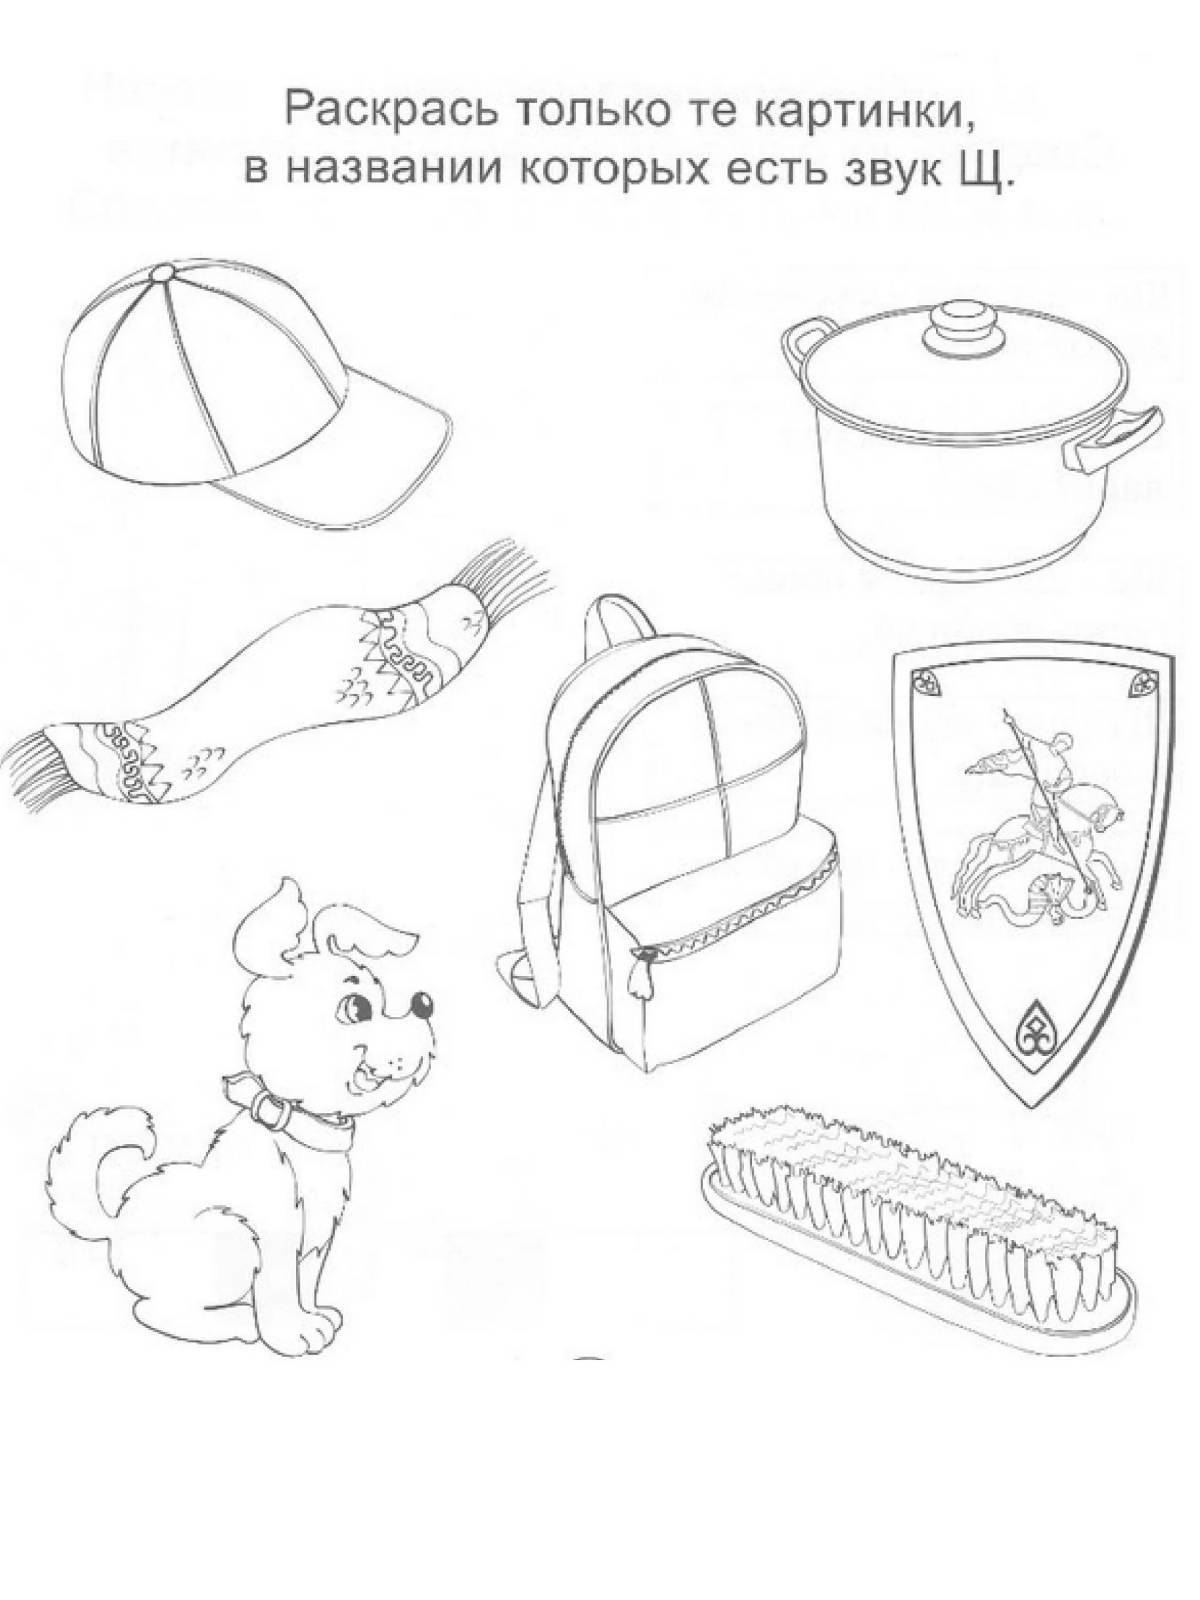 Entertaining sh sound coloring page